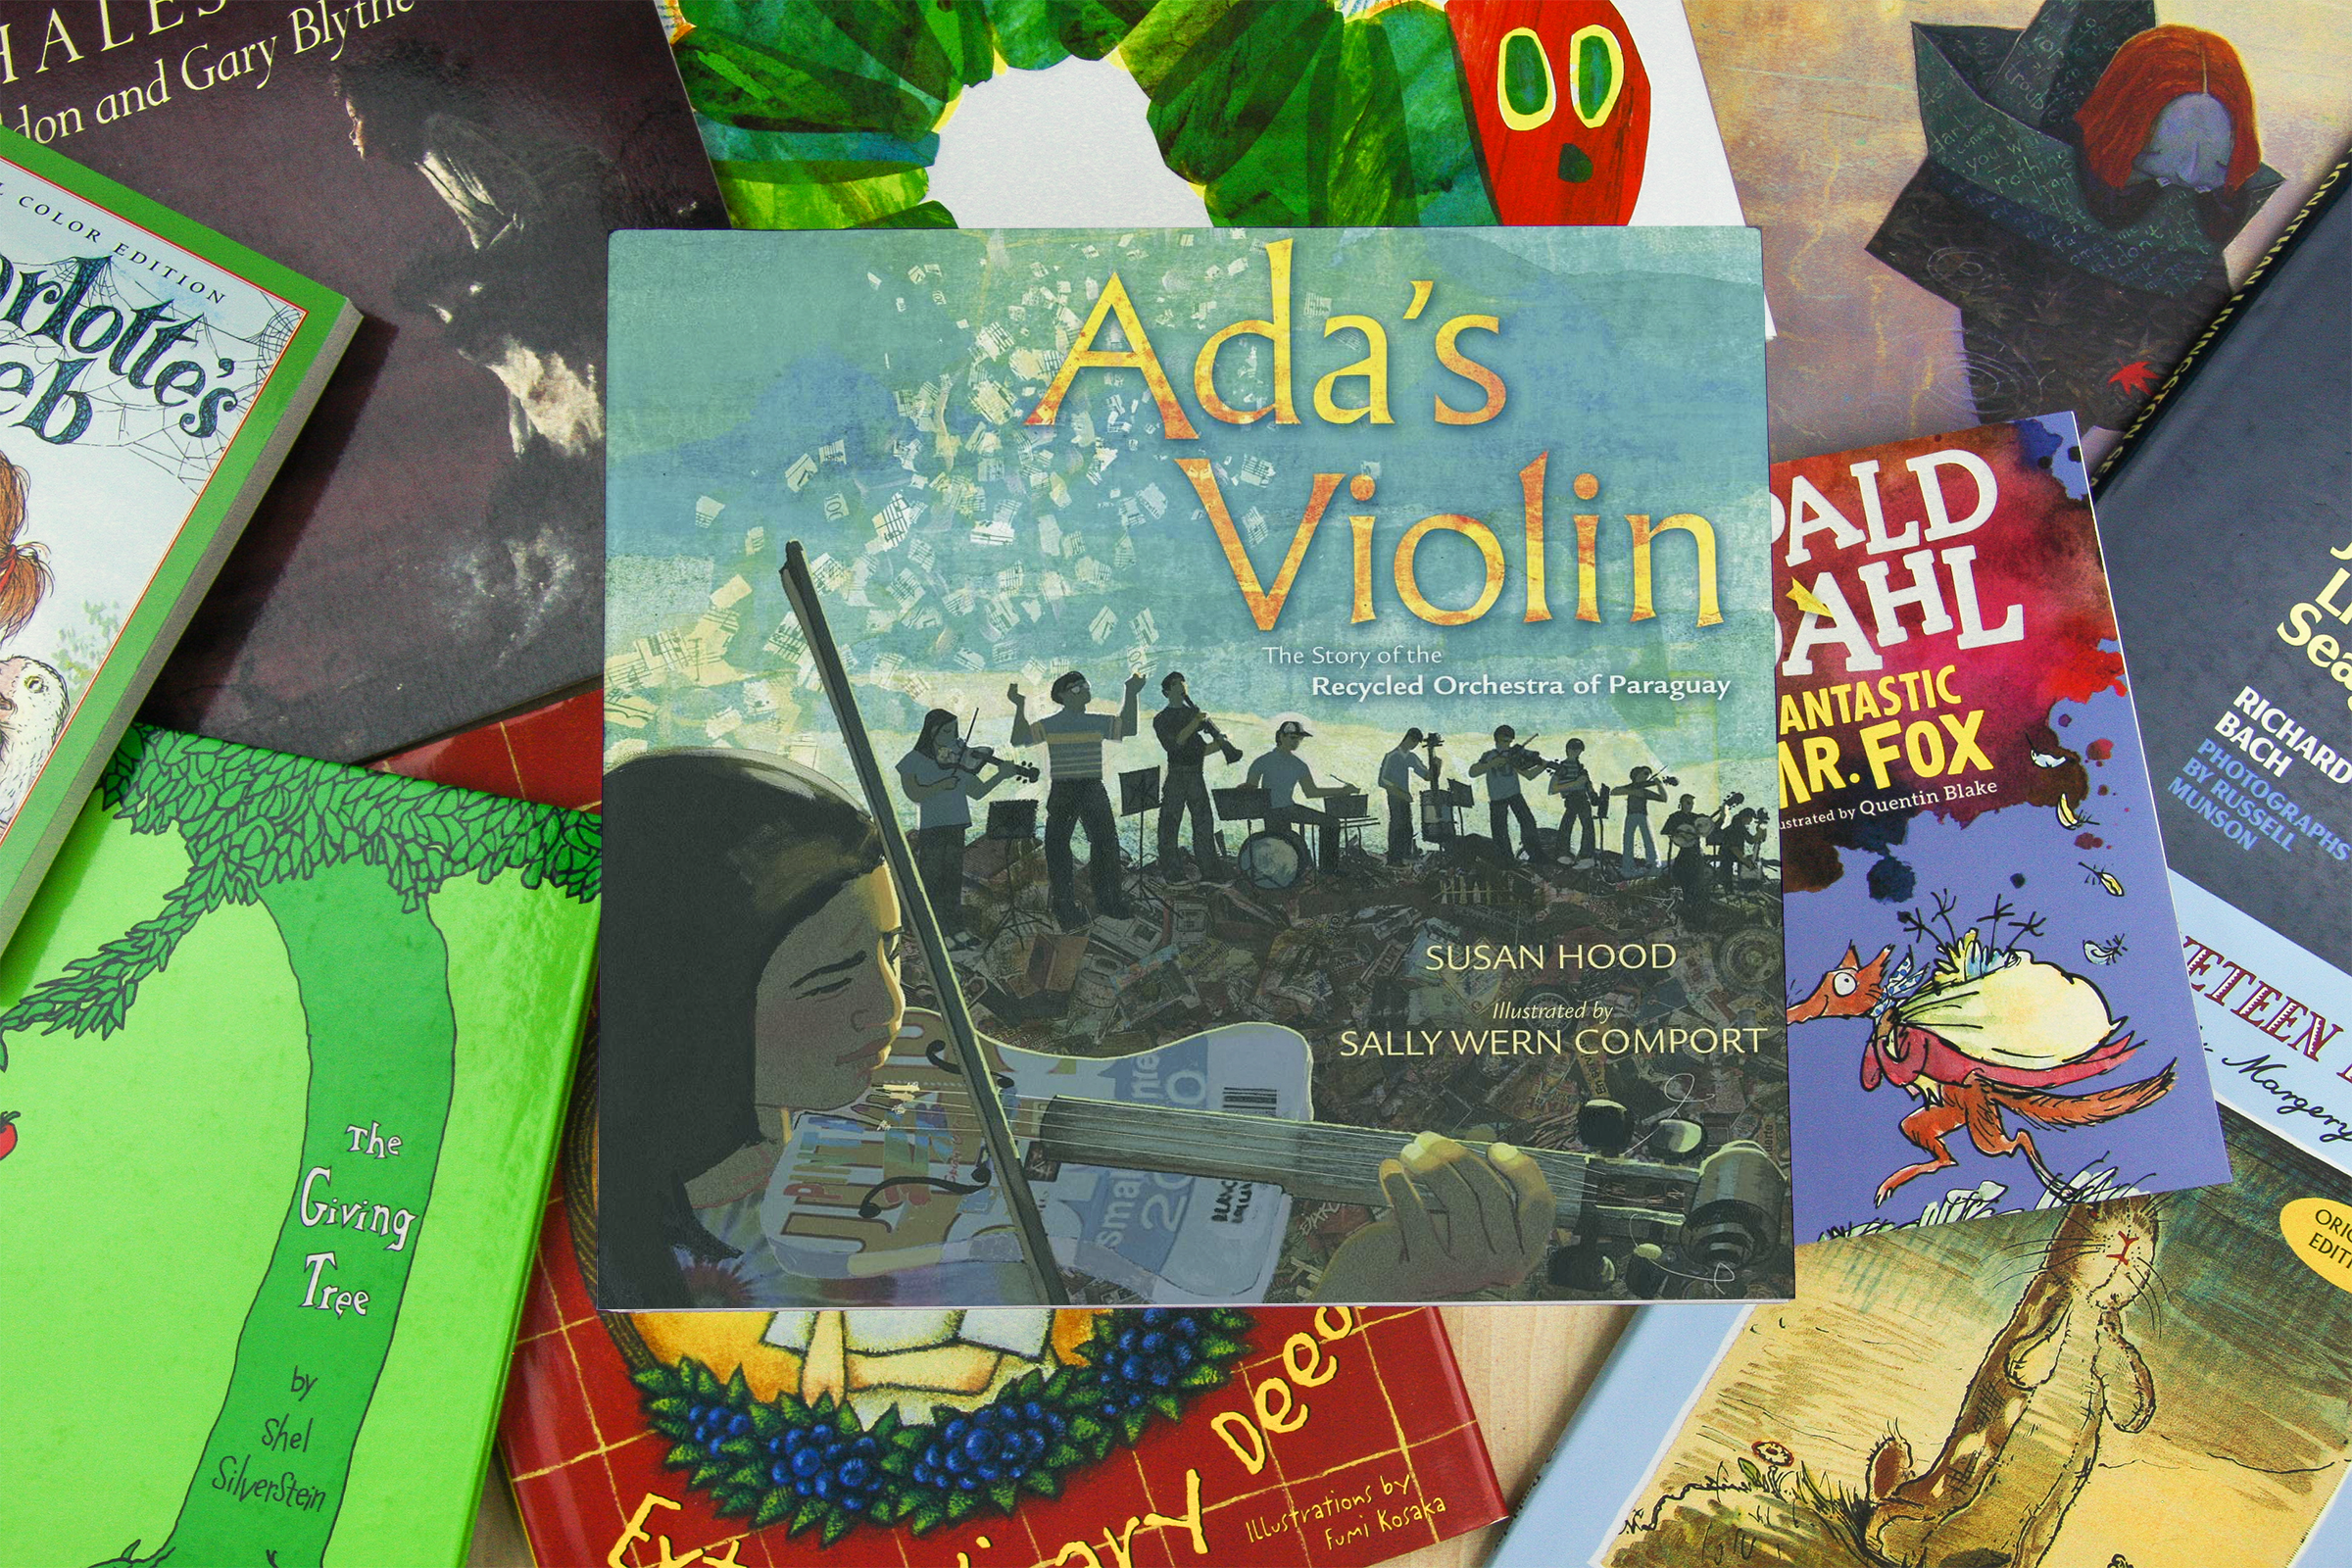 Image of Ada's Violin book on earlyminds.com